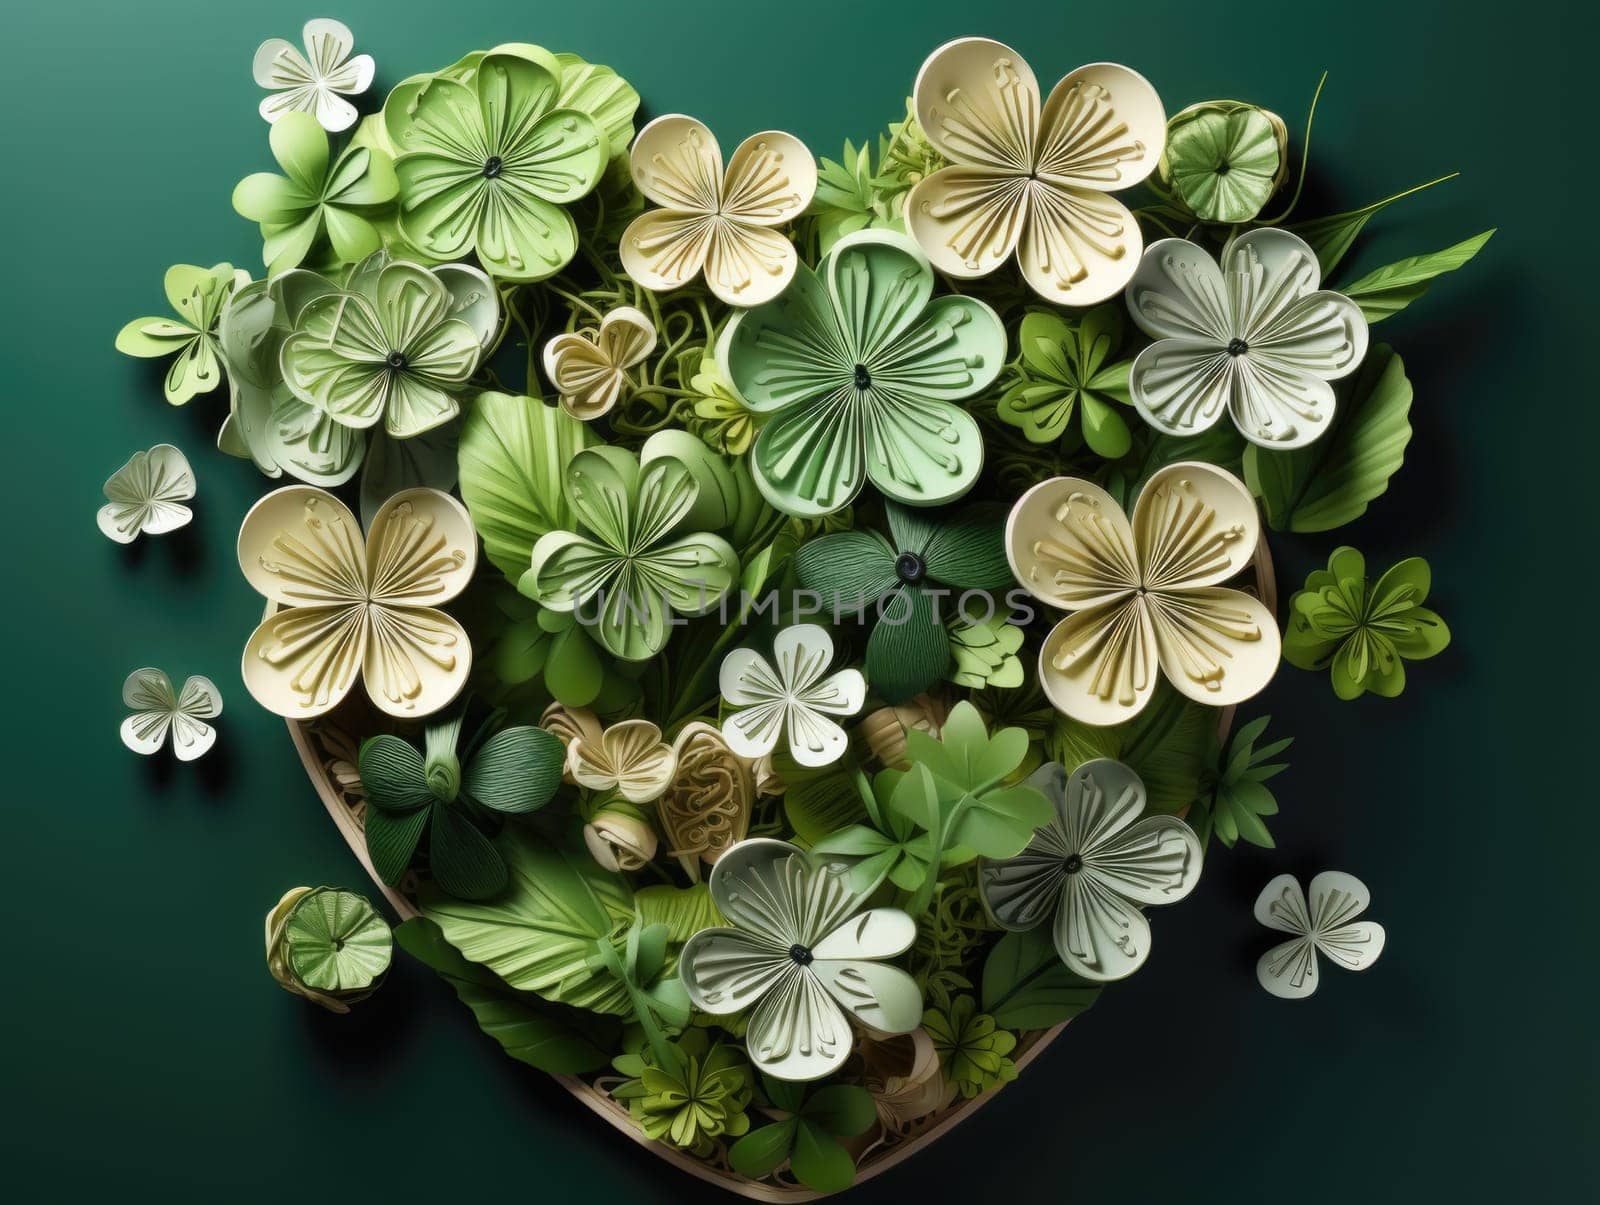 A heart-shaped arrangement of green and white flowers creating a visual centerpiece.